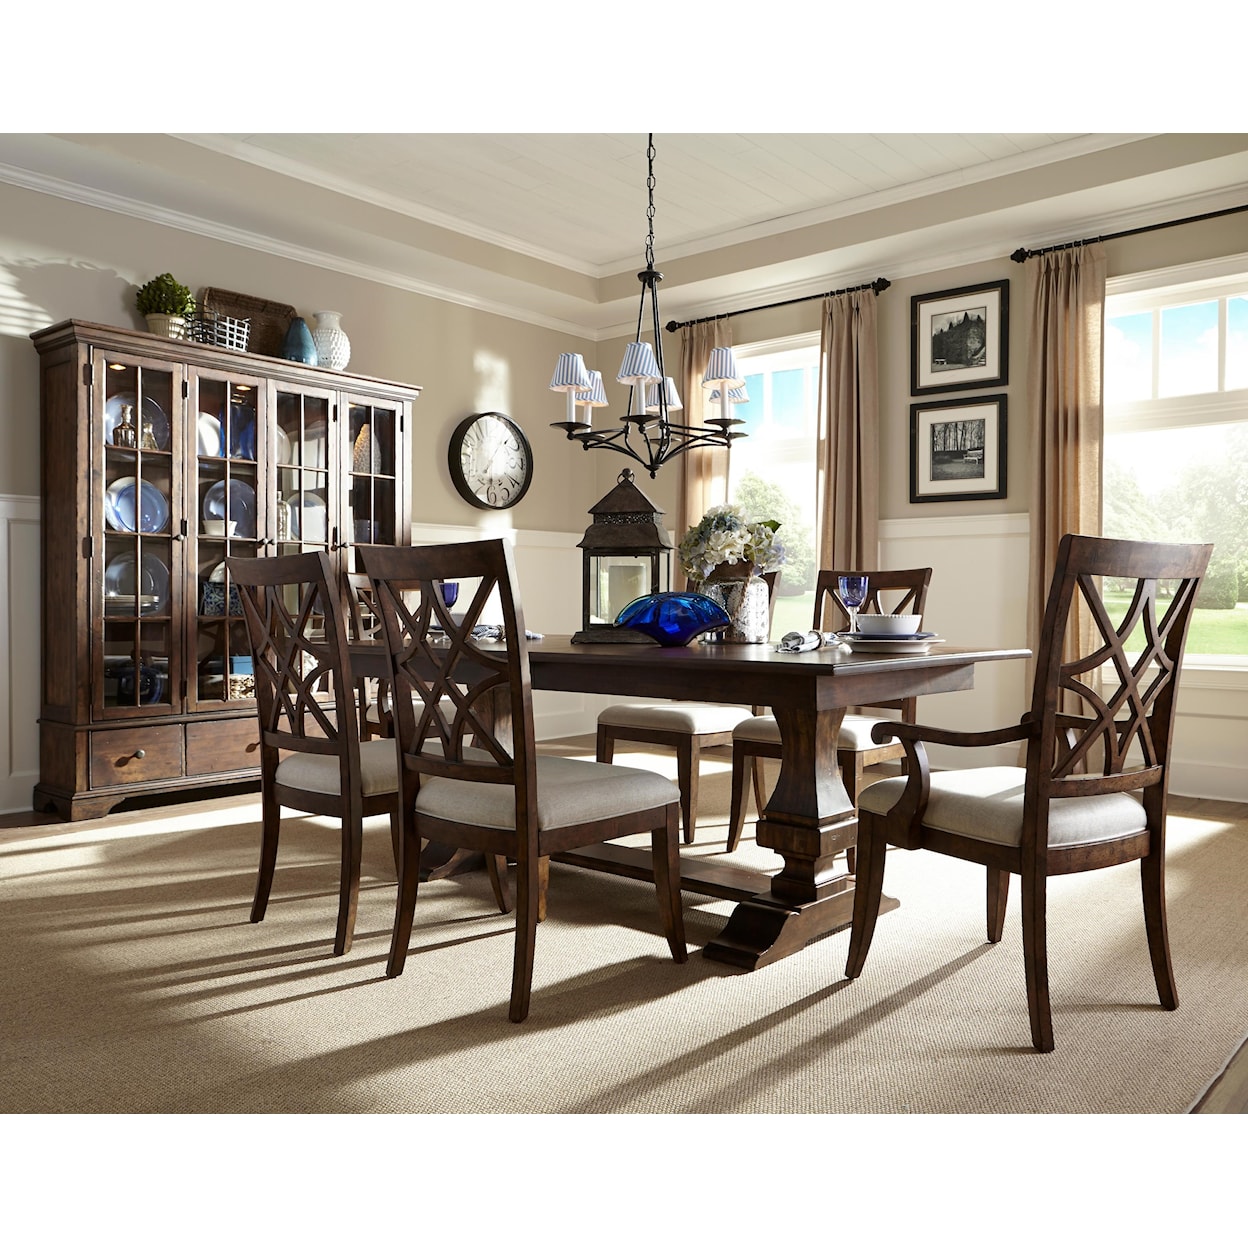 Trisha Yearwood Home Collection by Klaussner Trisha Yearwood Home 5 Piece Table and Chair Set